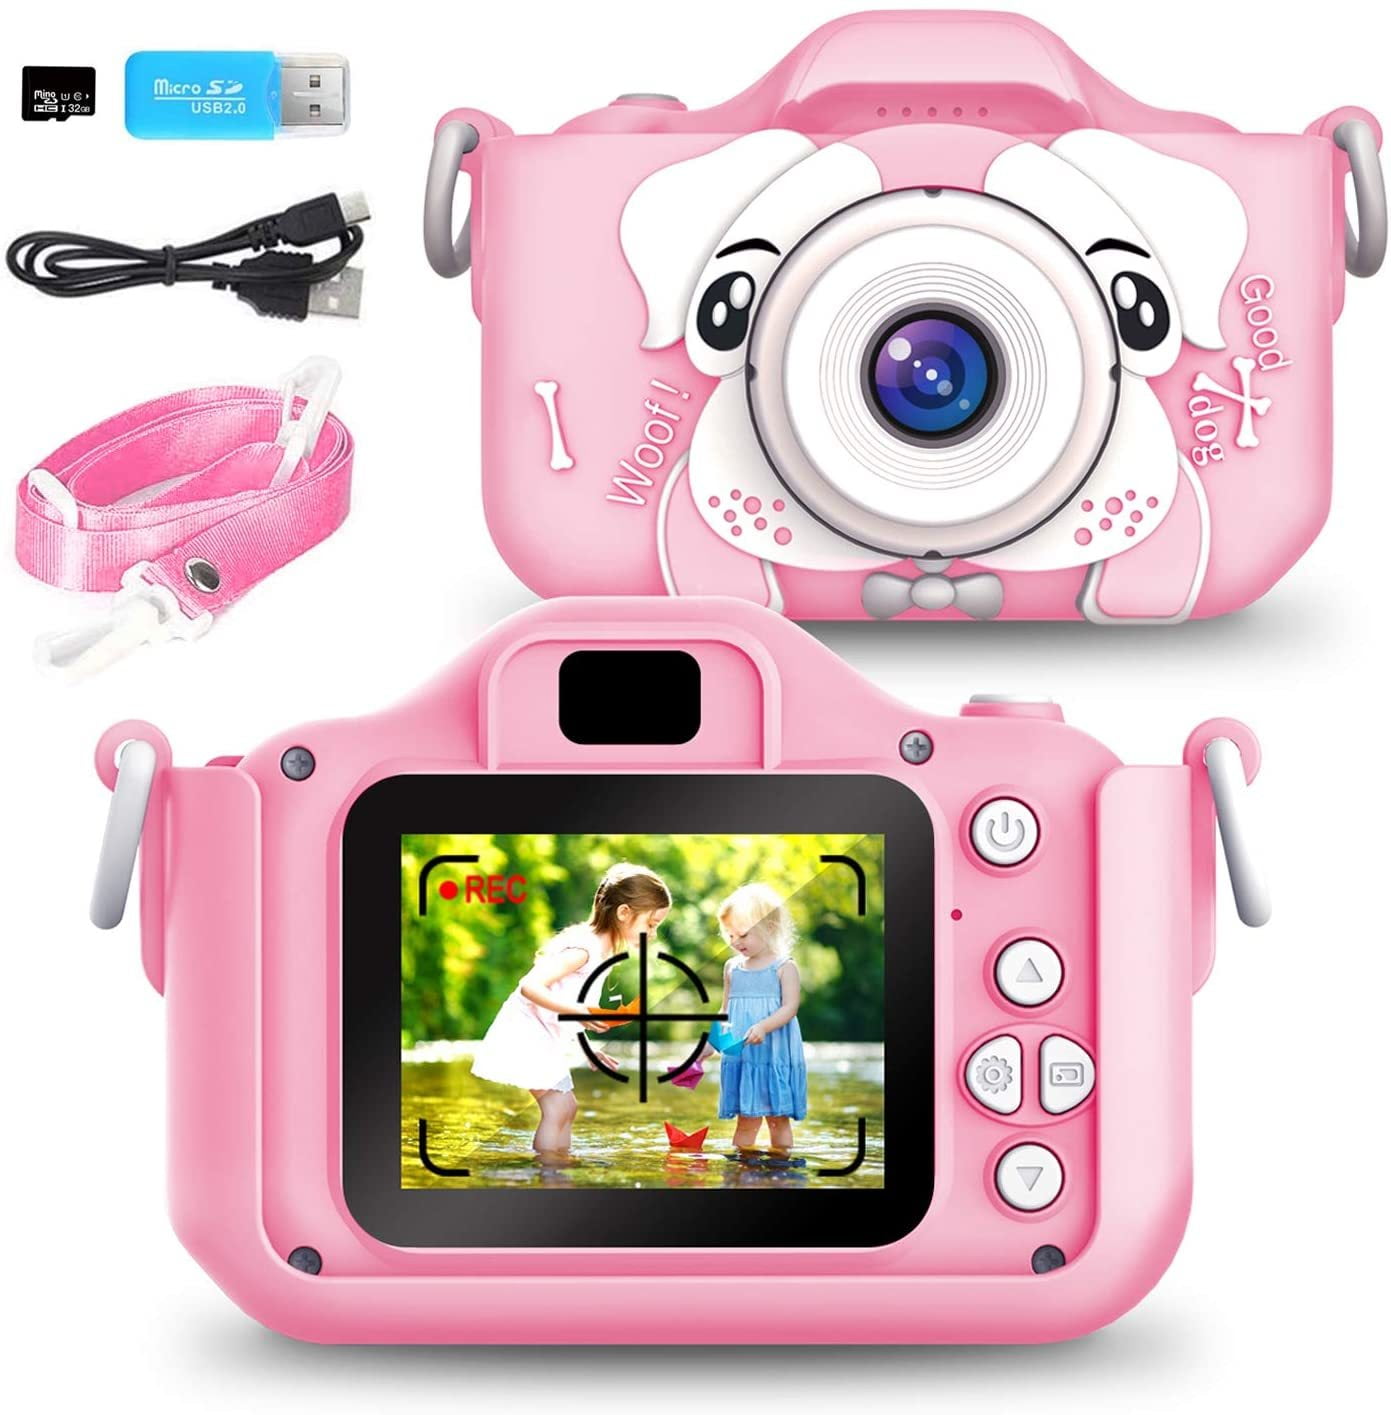 MITMOR Kids Camera Boys Cute Child Digital Camera 32GB Dual Lens 2.0 Inch IPS Color Screen 20.0MP HD Children Digital Cameras Mini Toy Camcorder for 2-14 Years Kids Birthday Holiday Traveling Gift 